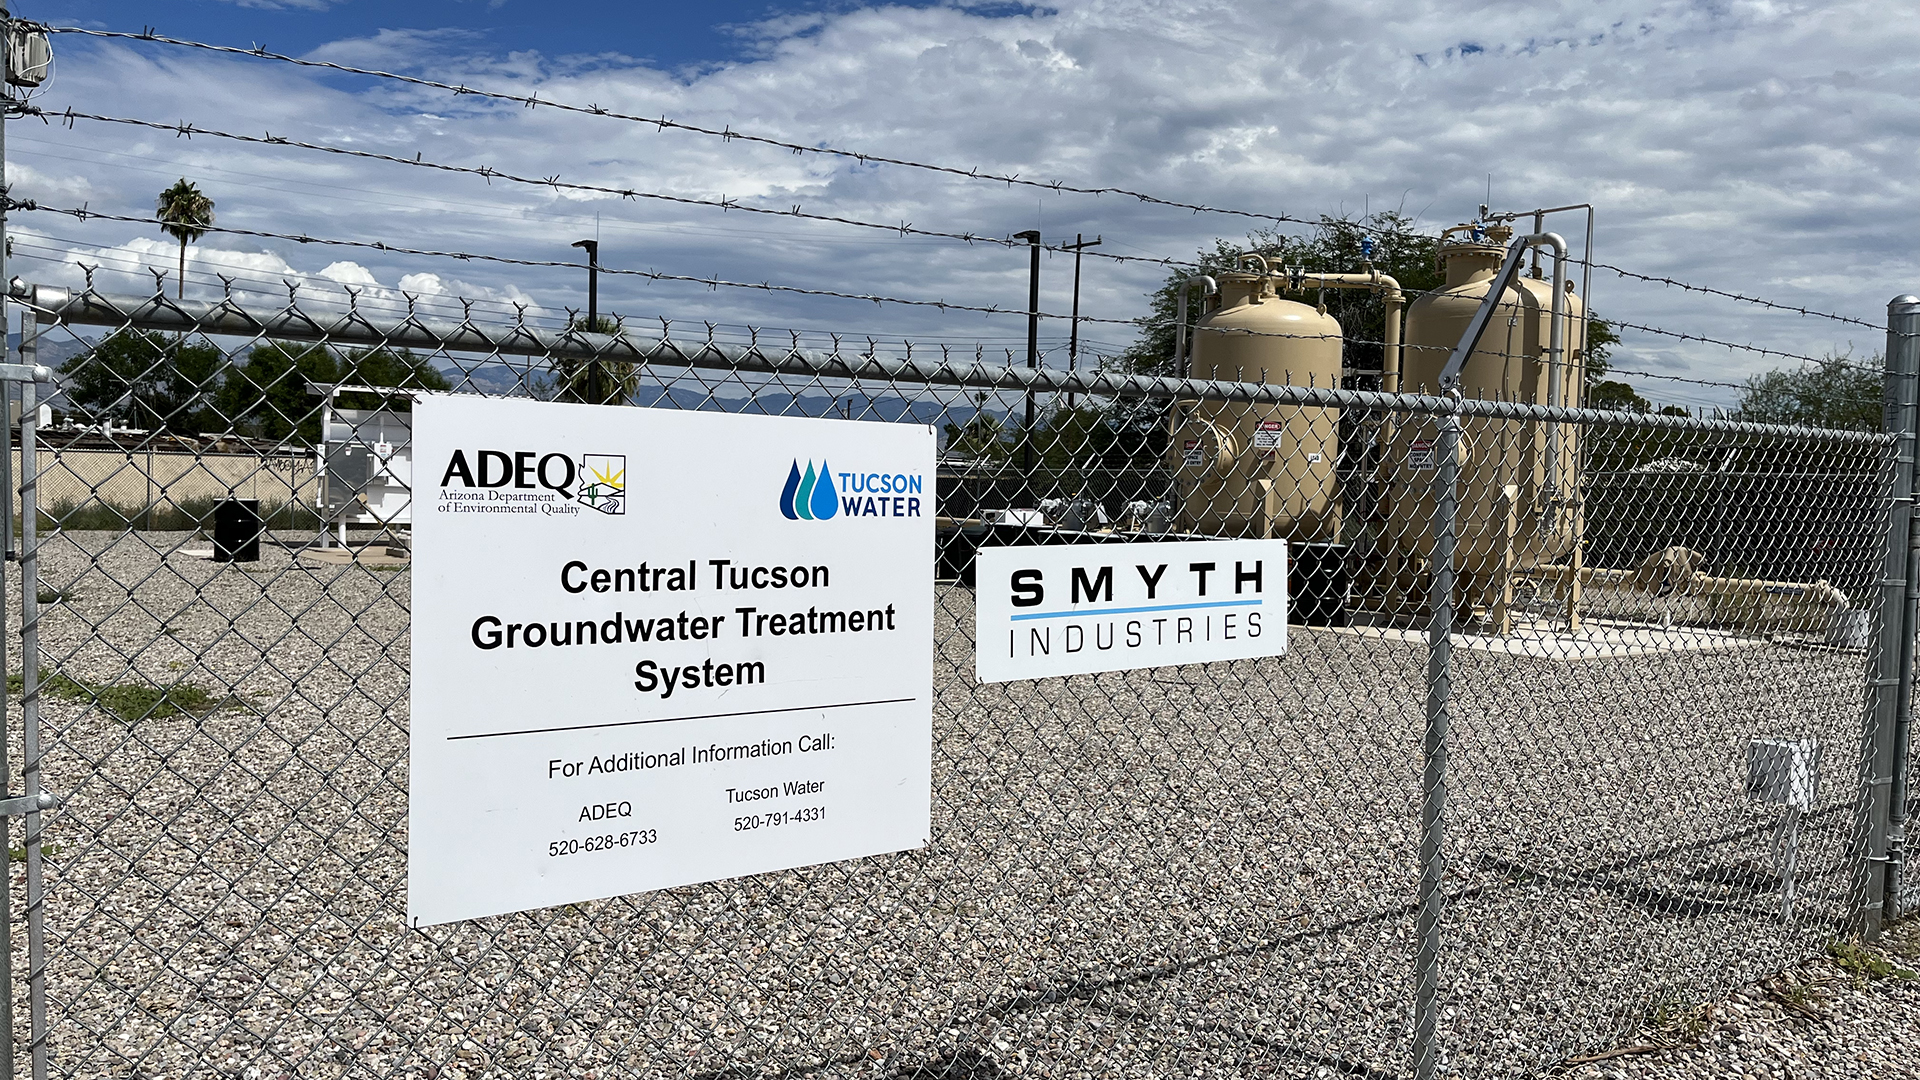 The Central Tucson Groundwater Treatment System, located near Davis Monthan Air Force Base, removes PFAS contaminates from the aquifer below the area.